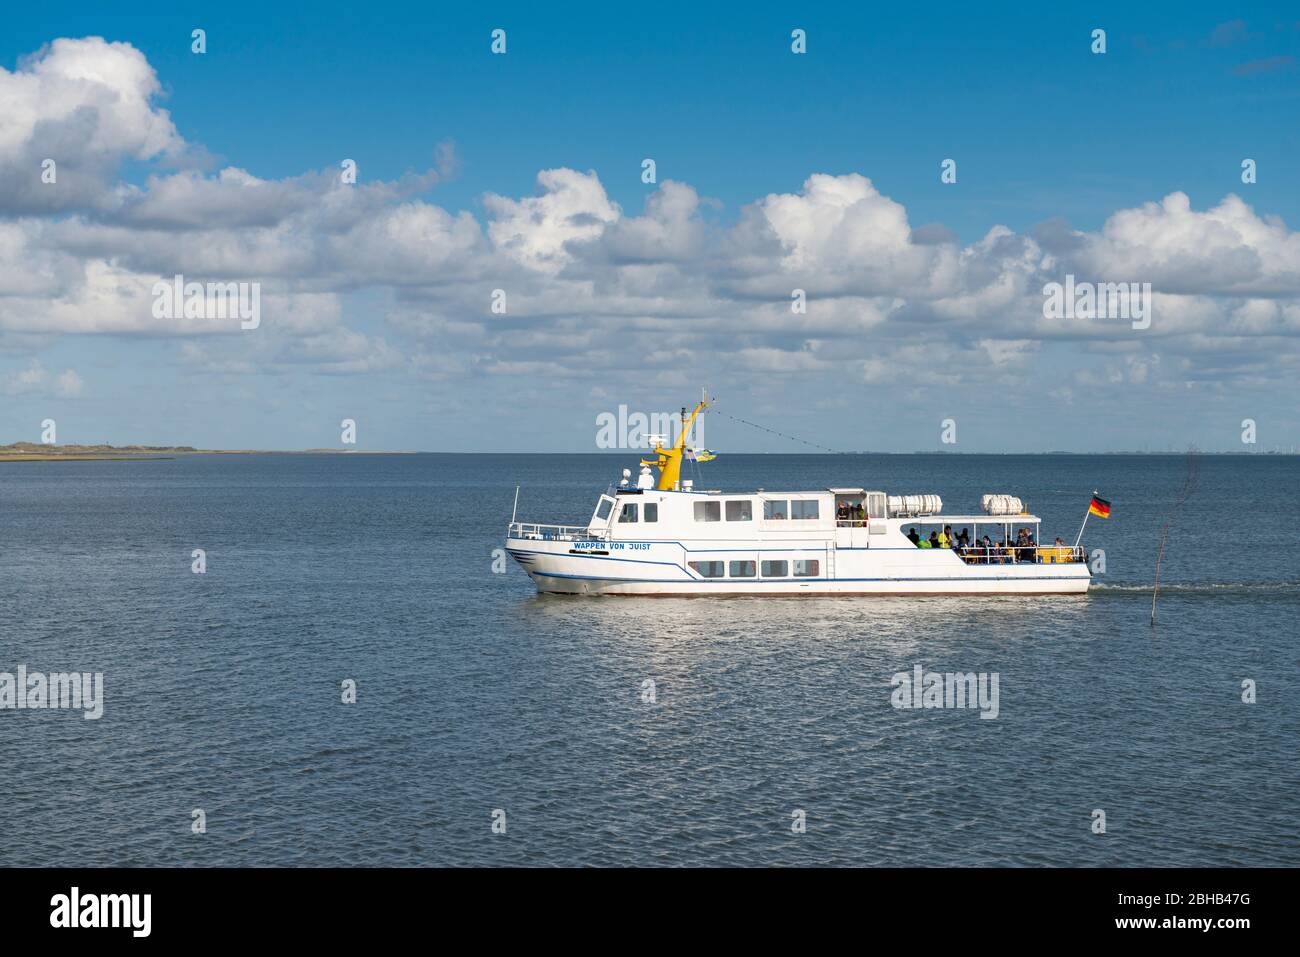 Germany, Lower Saxony, East Frisia, Juist, the 'Crest of Juist' offers excursions. Stock Photo